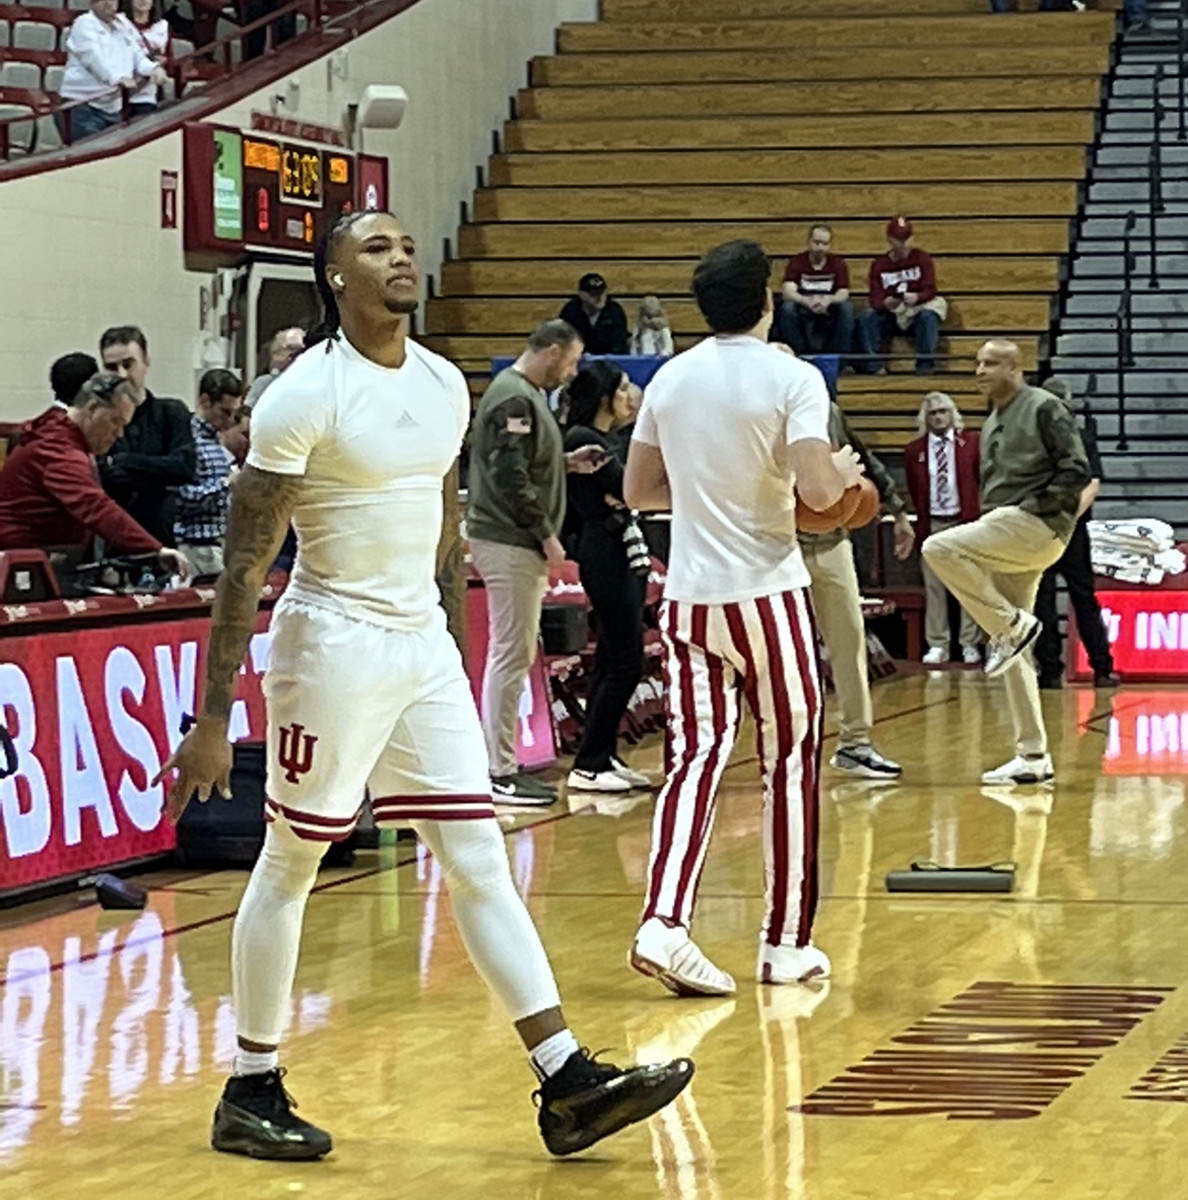 Indiana freshman guard Jakai Newton is in uniform for warmups. He's still listed out for today's game, but this is a positive sign in his recovery from knee surgery.